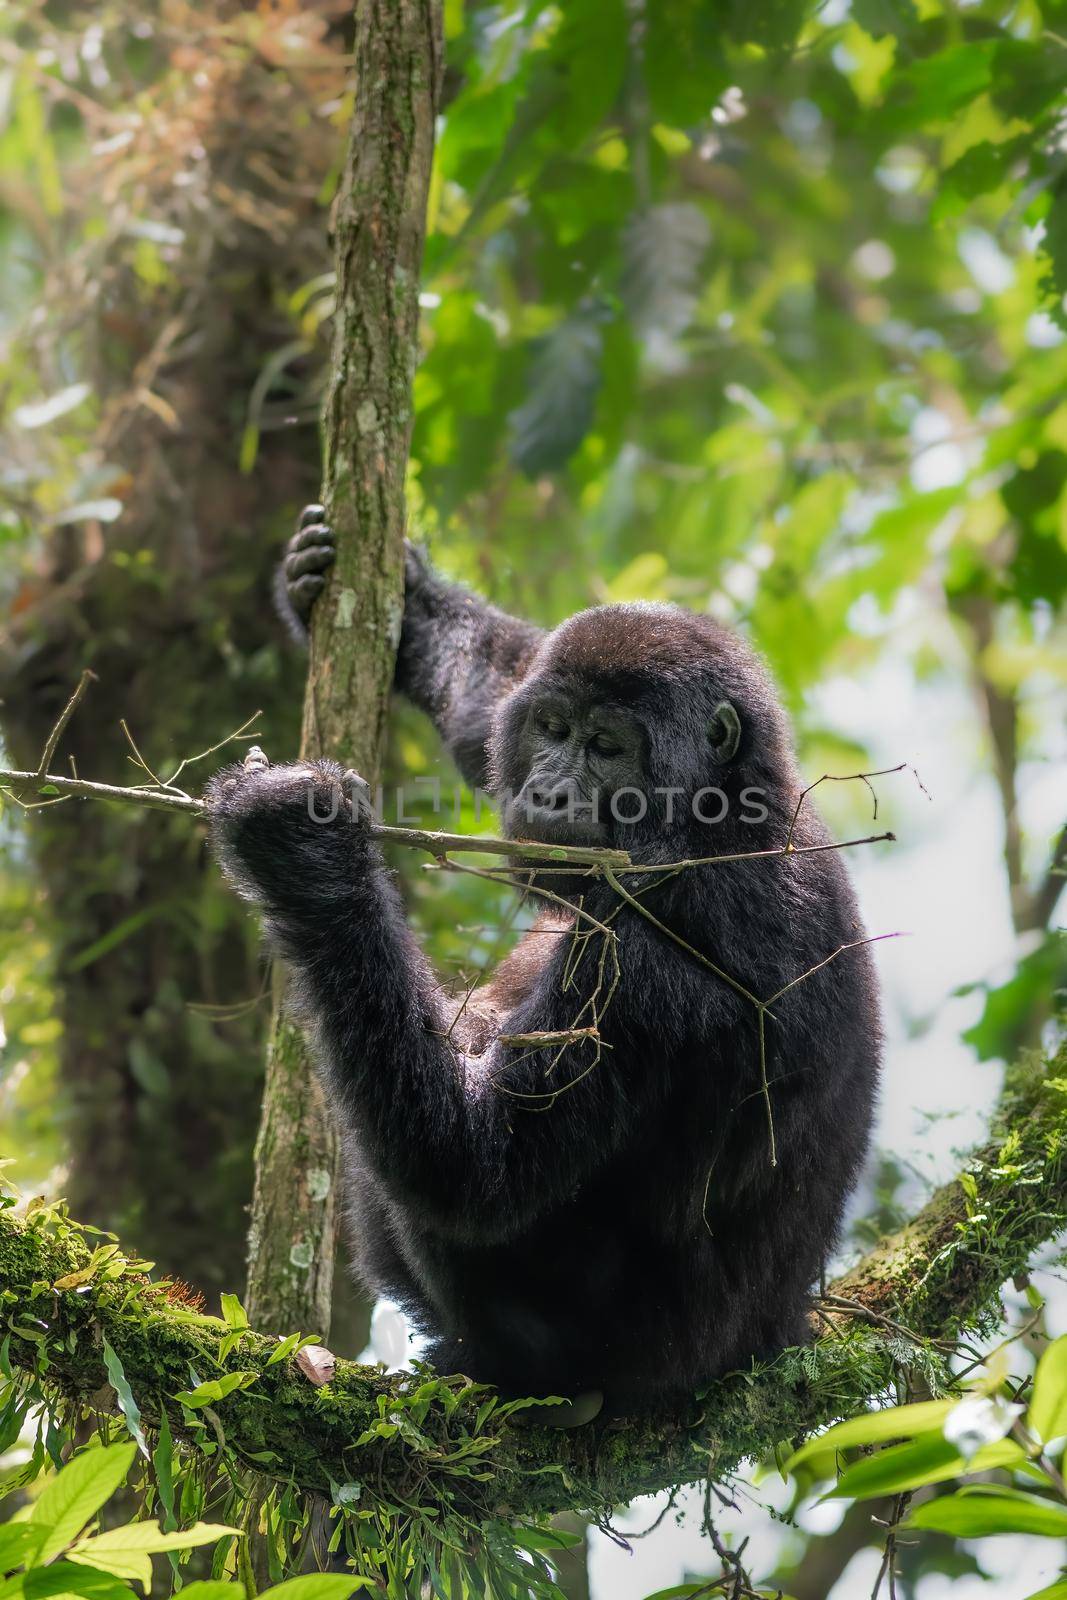 Mountain Gorilla in Bwindi Impenetrable Forest National Park